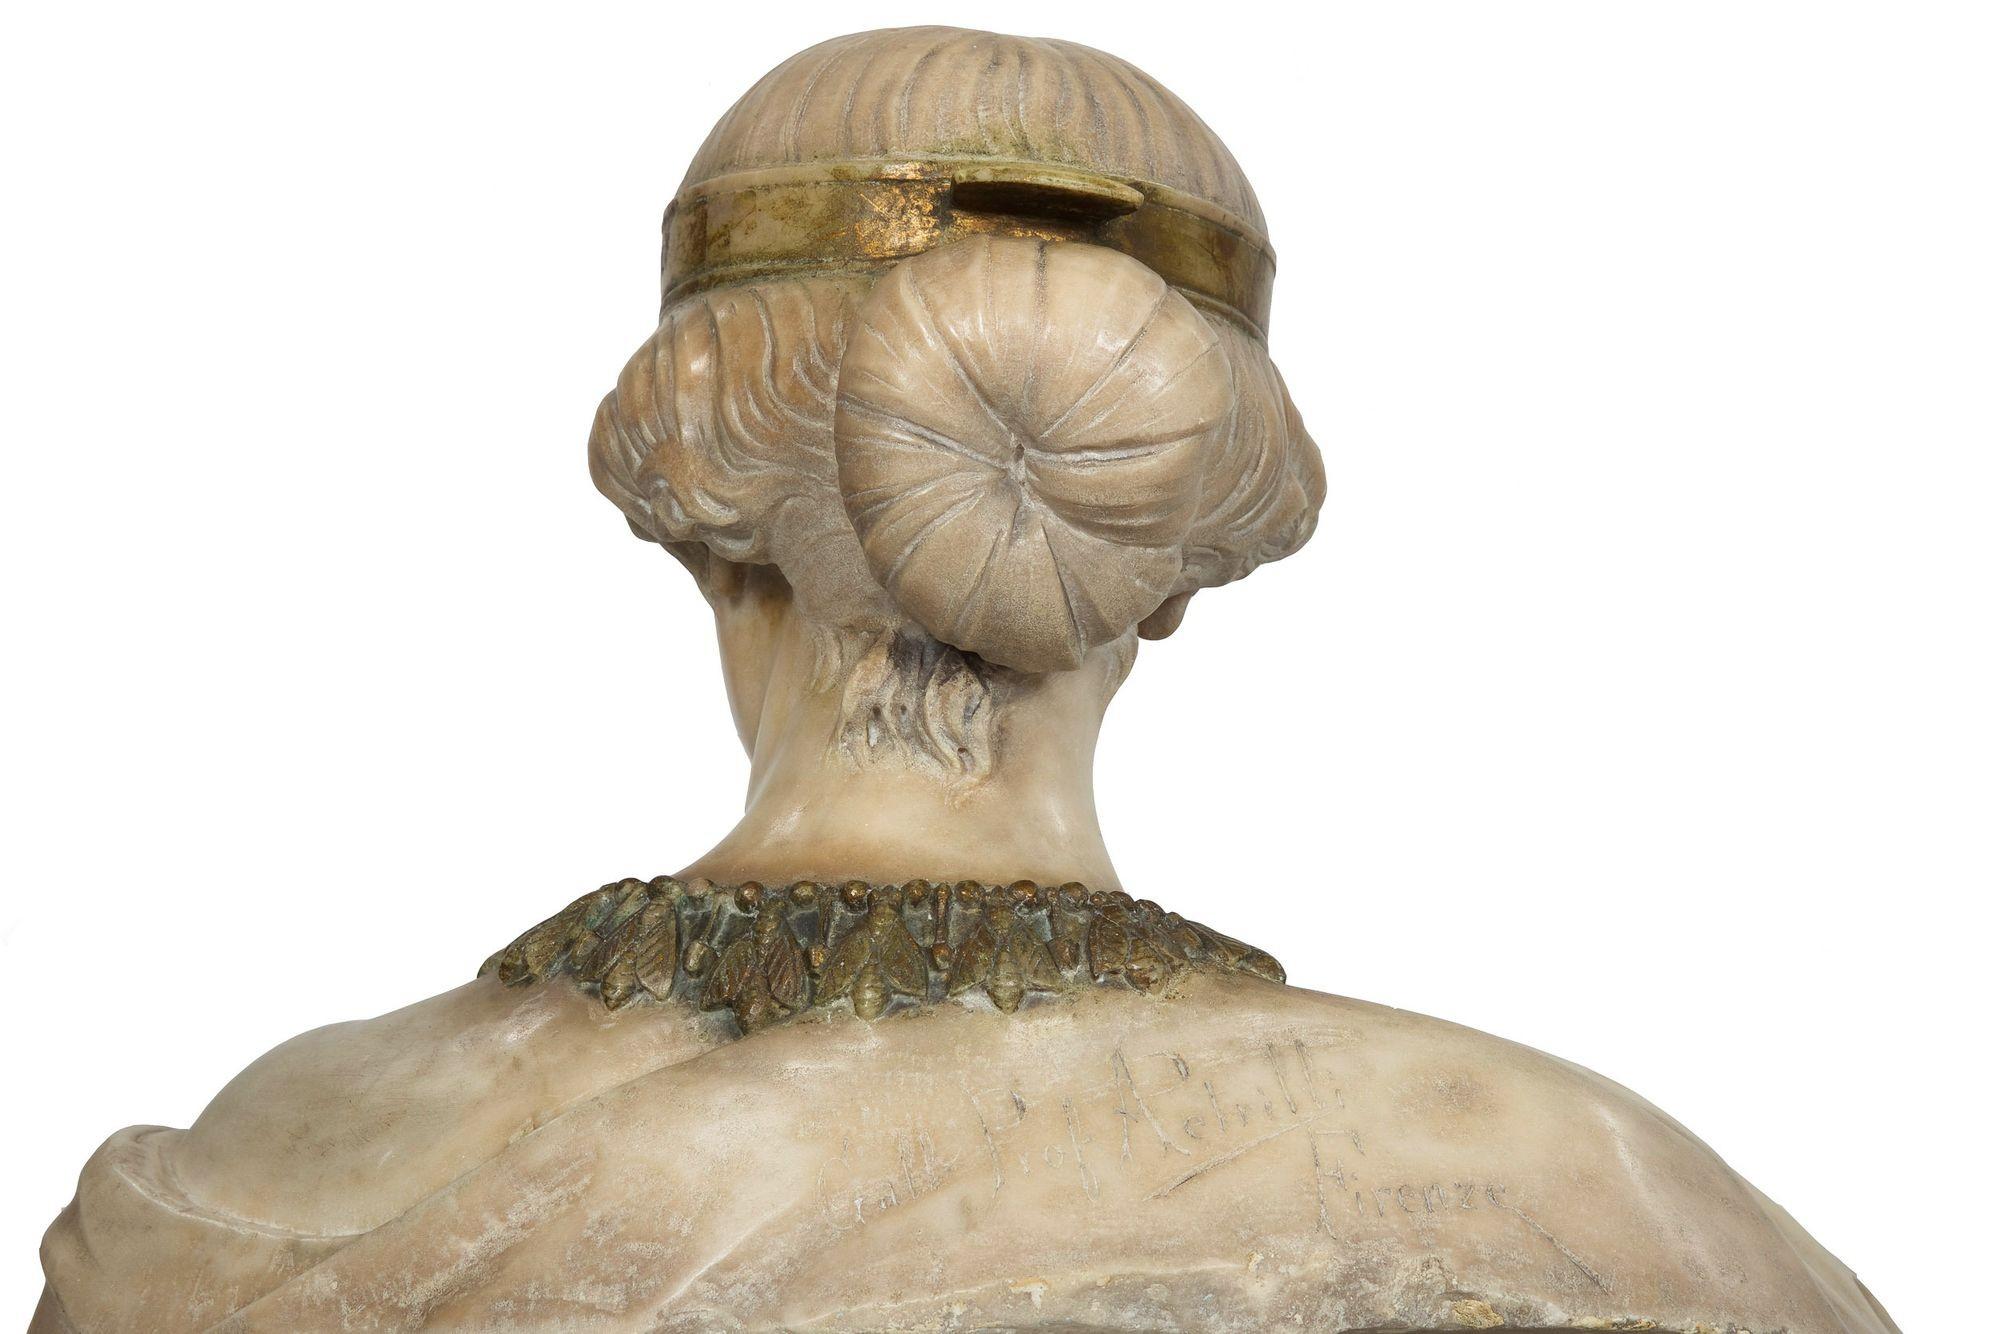 19th Century Marble Sculpture “Bust of Cleopatra” by Aristide Petrilli